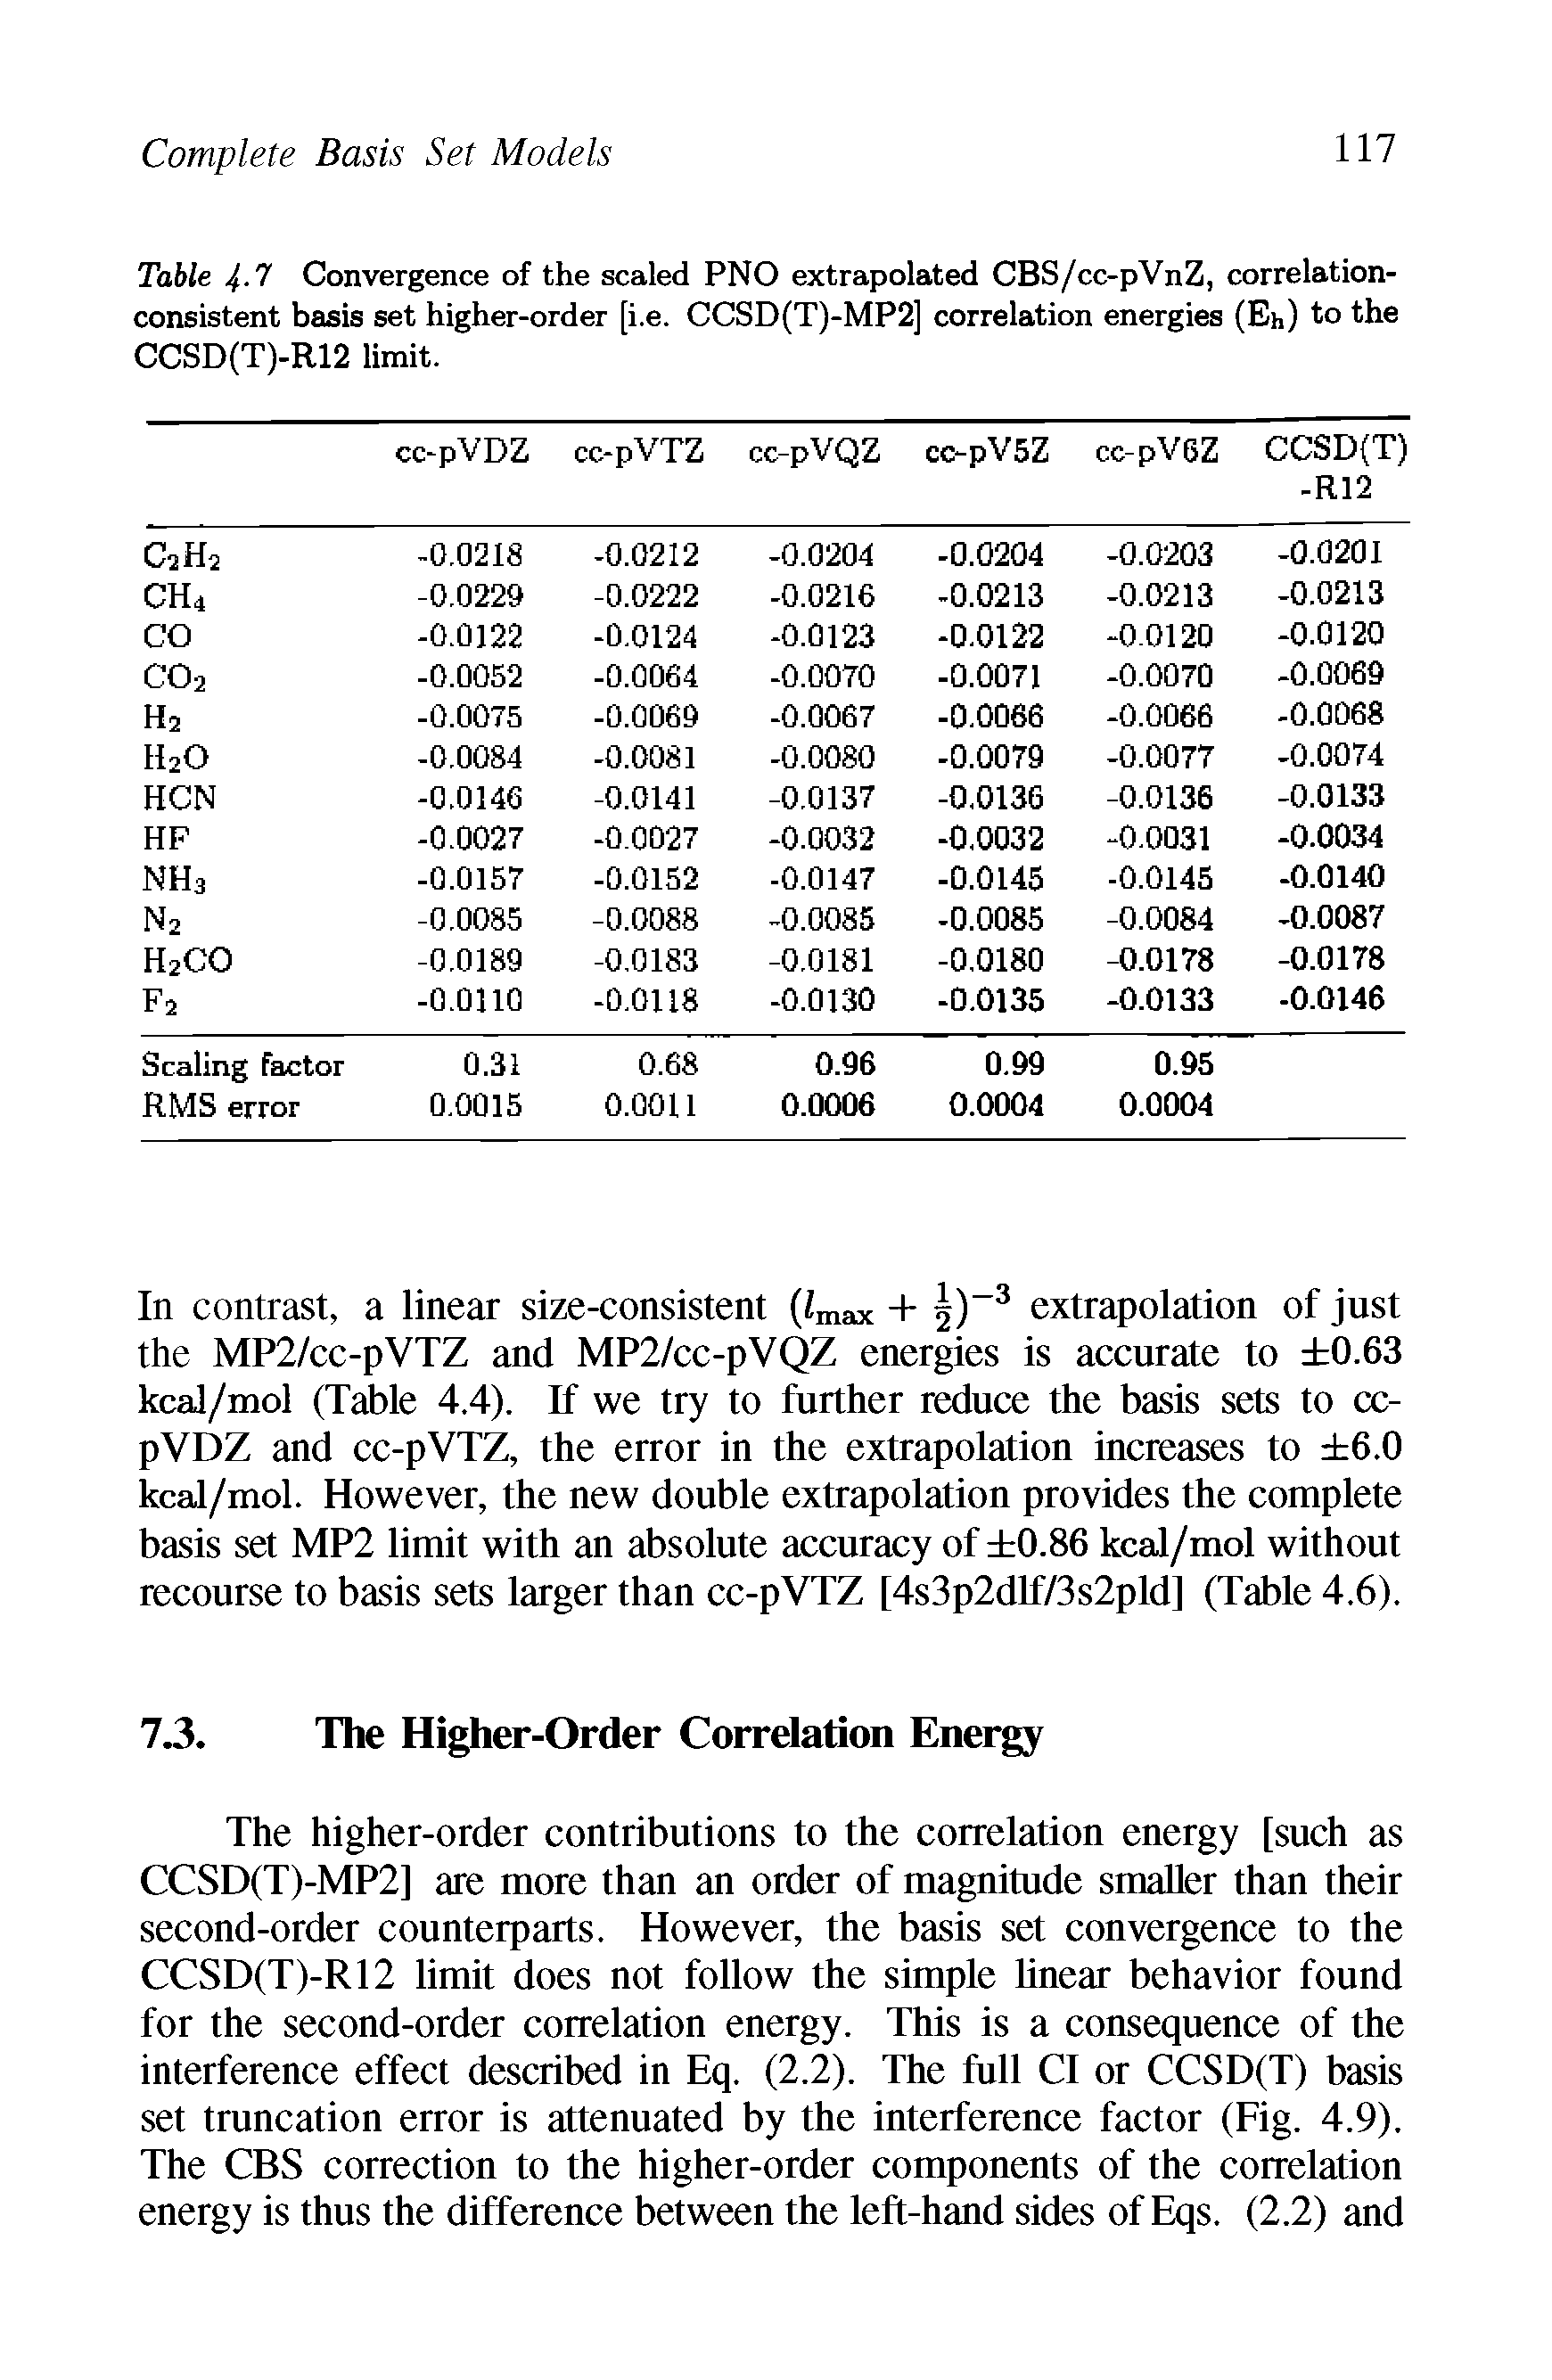 Table 7 Convergence of the scaled PNO extrapolated CBS/cc-pVnZ, correlation-consistent basis set higher-order [i.e. CCSD(T)-MP2] correlation energies (Eh) to the CCSD(T)-R12 limit.